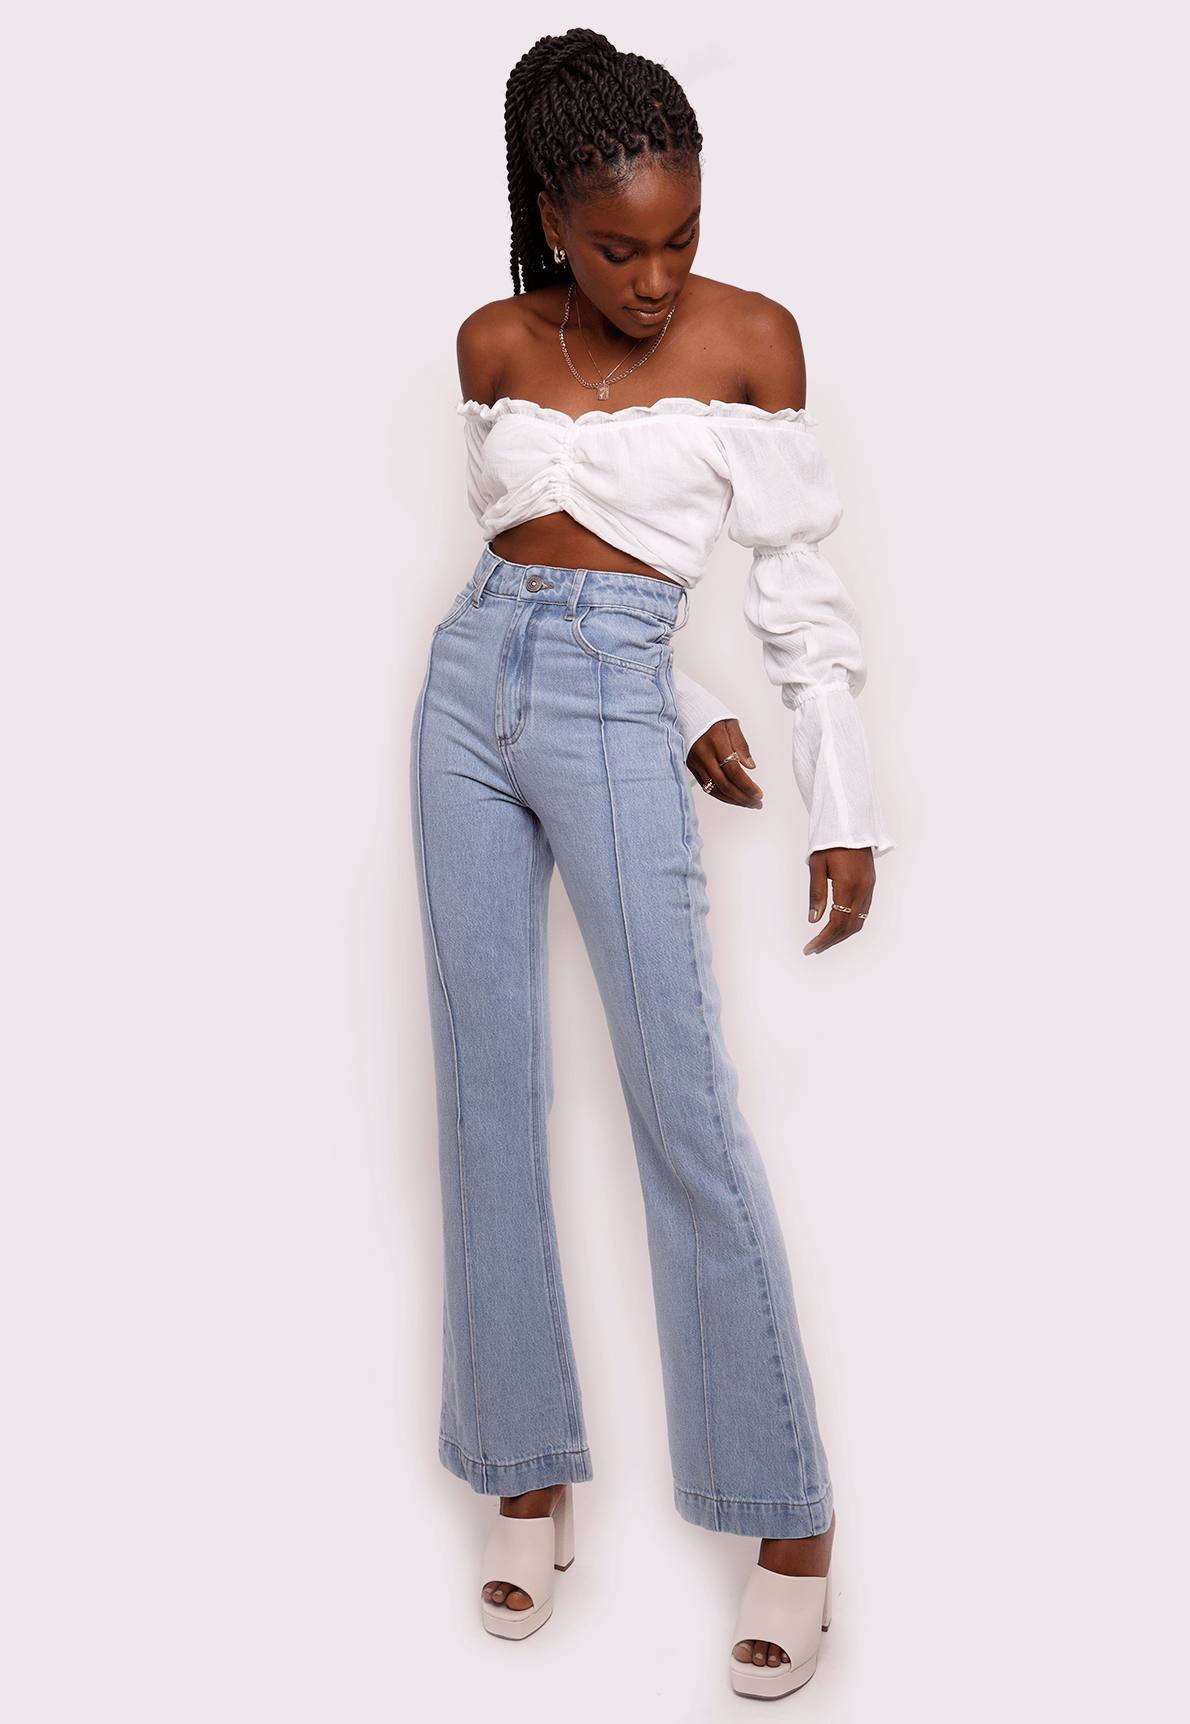 90s old flare pants